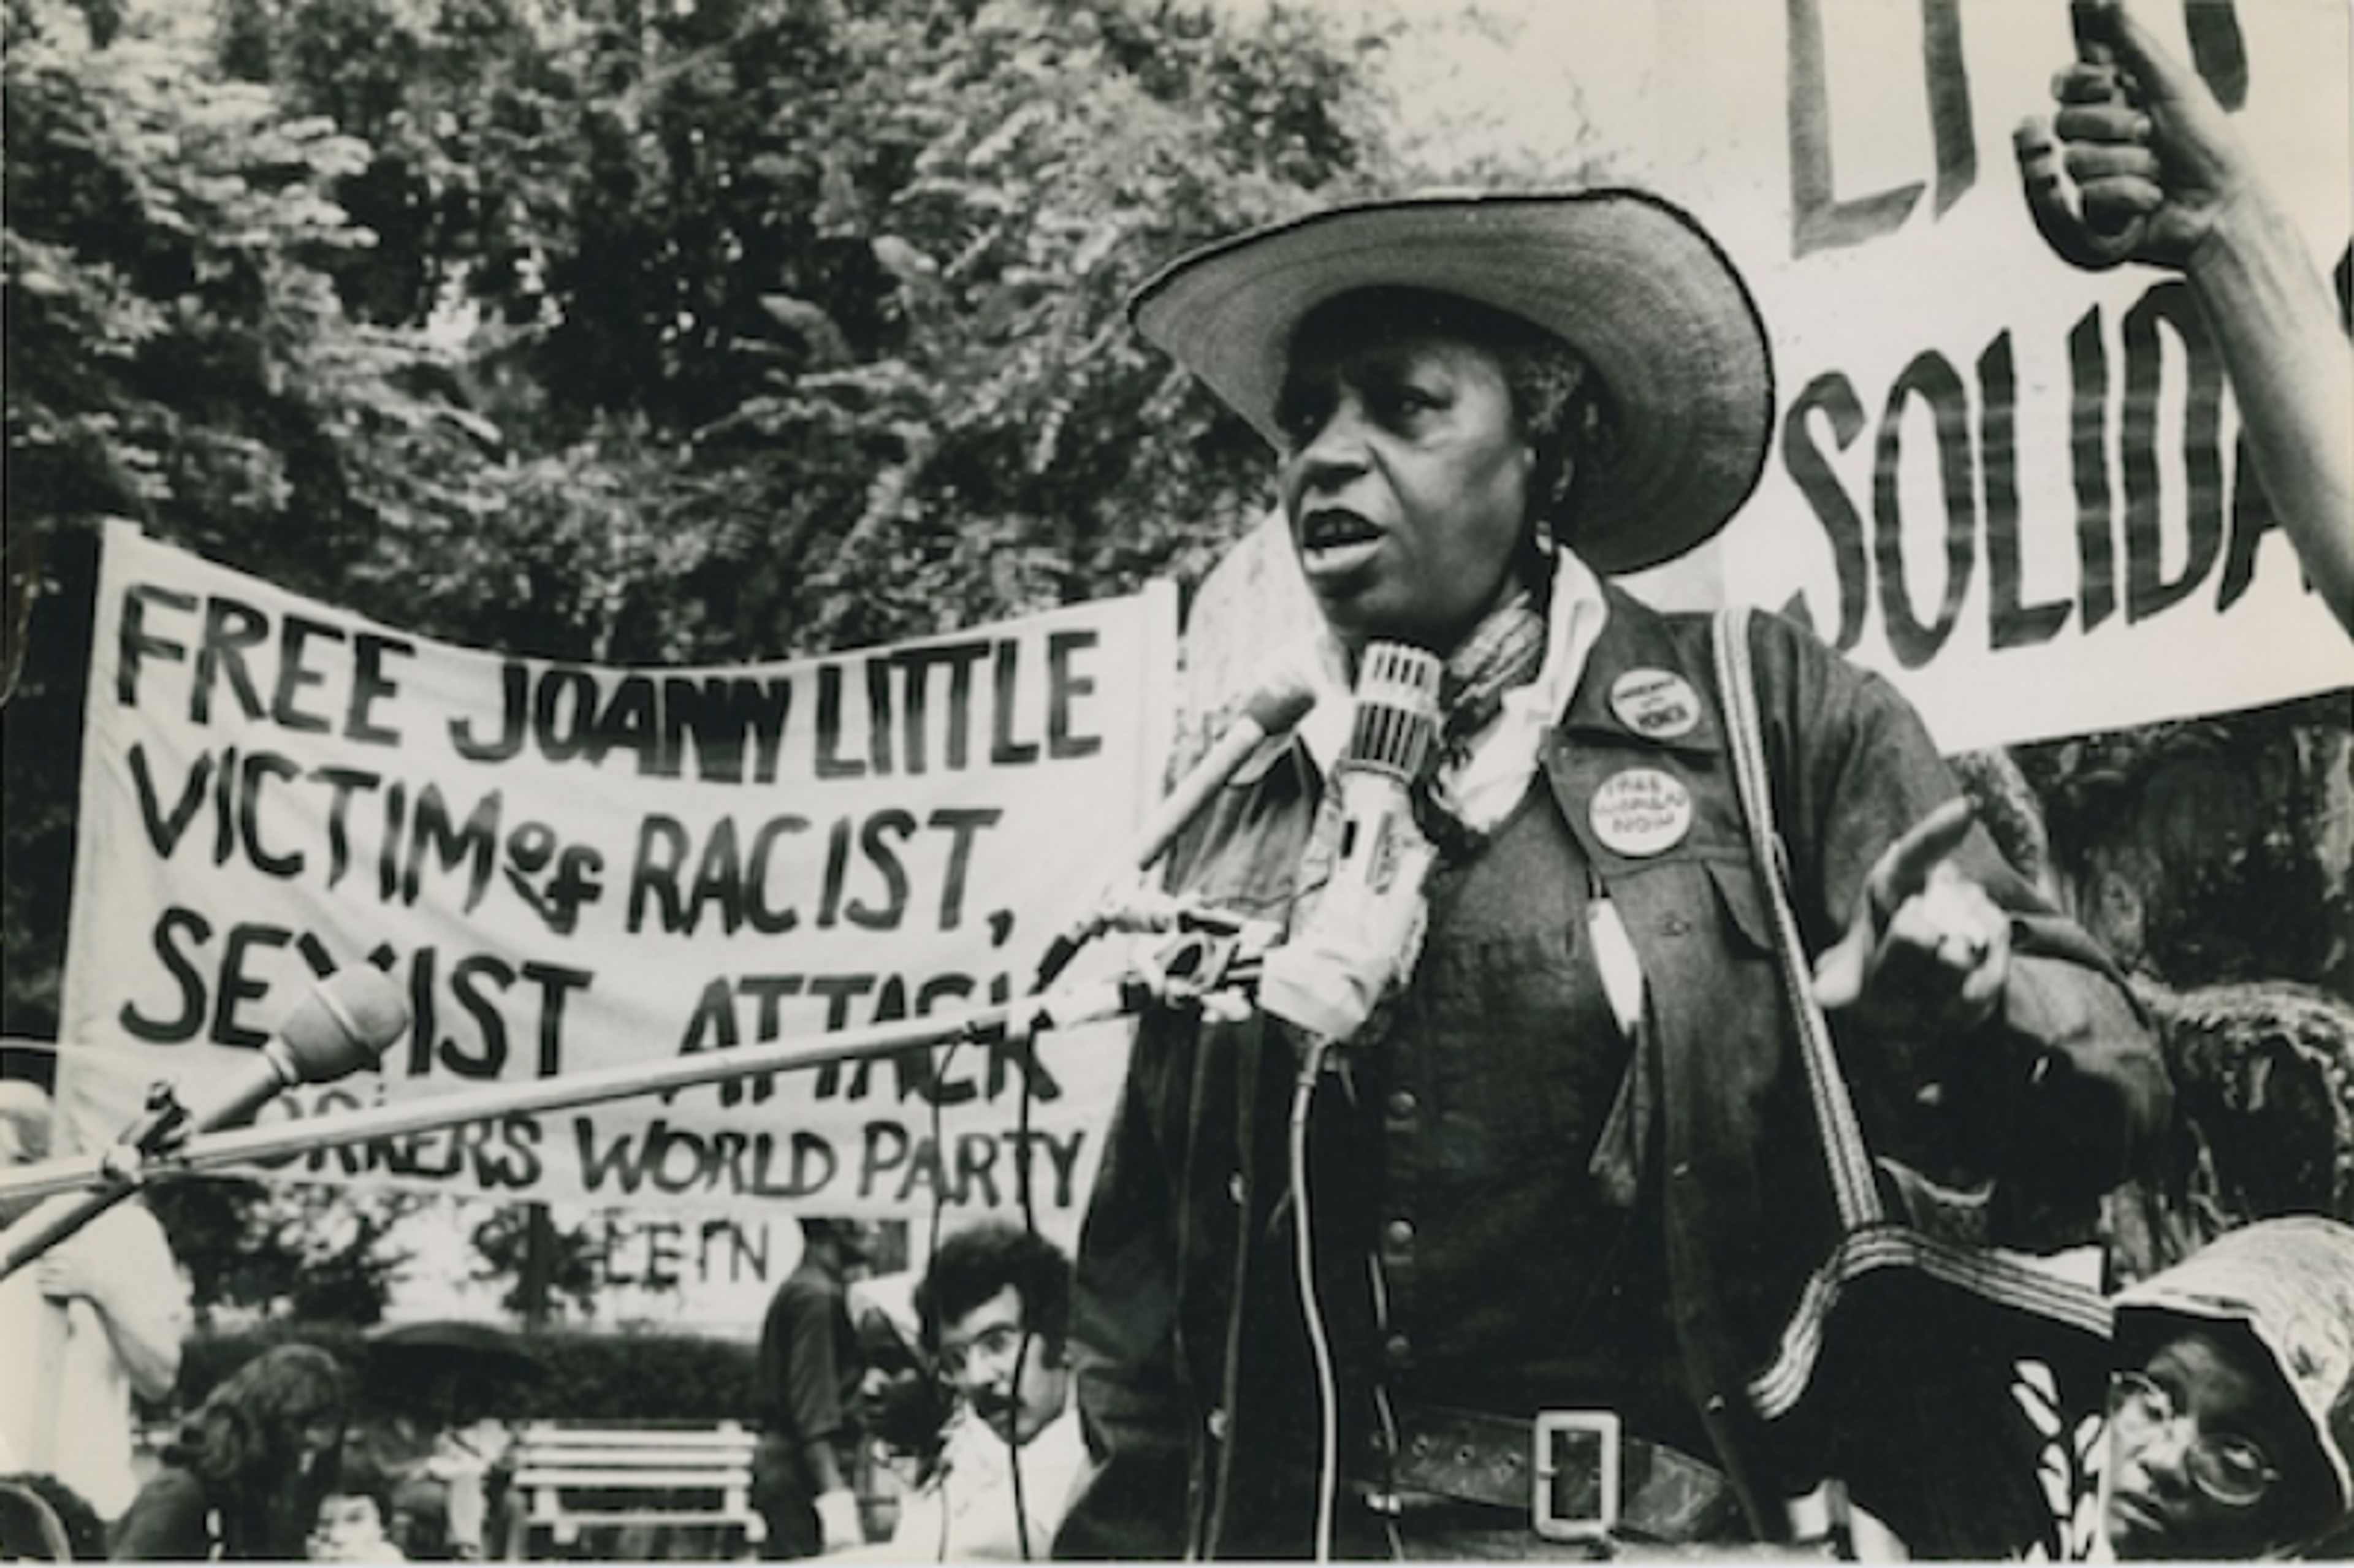 Florynce &quot;Flo&quot; Kennedy speaks at a protest, July 12, 1975.